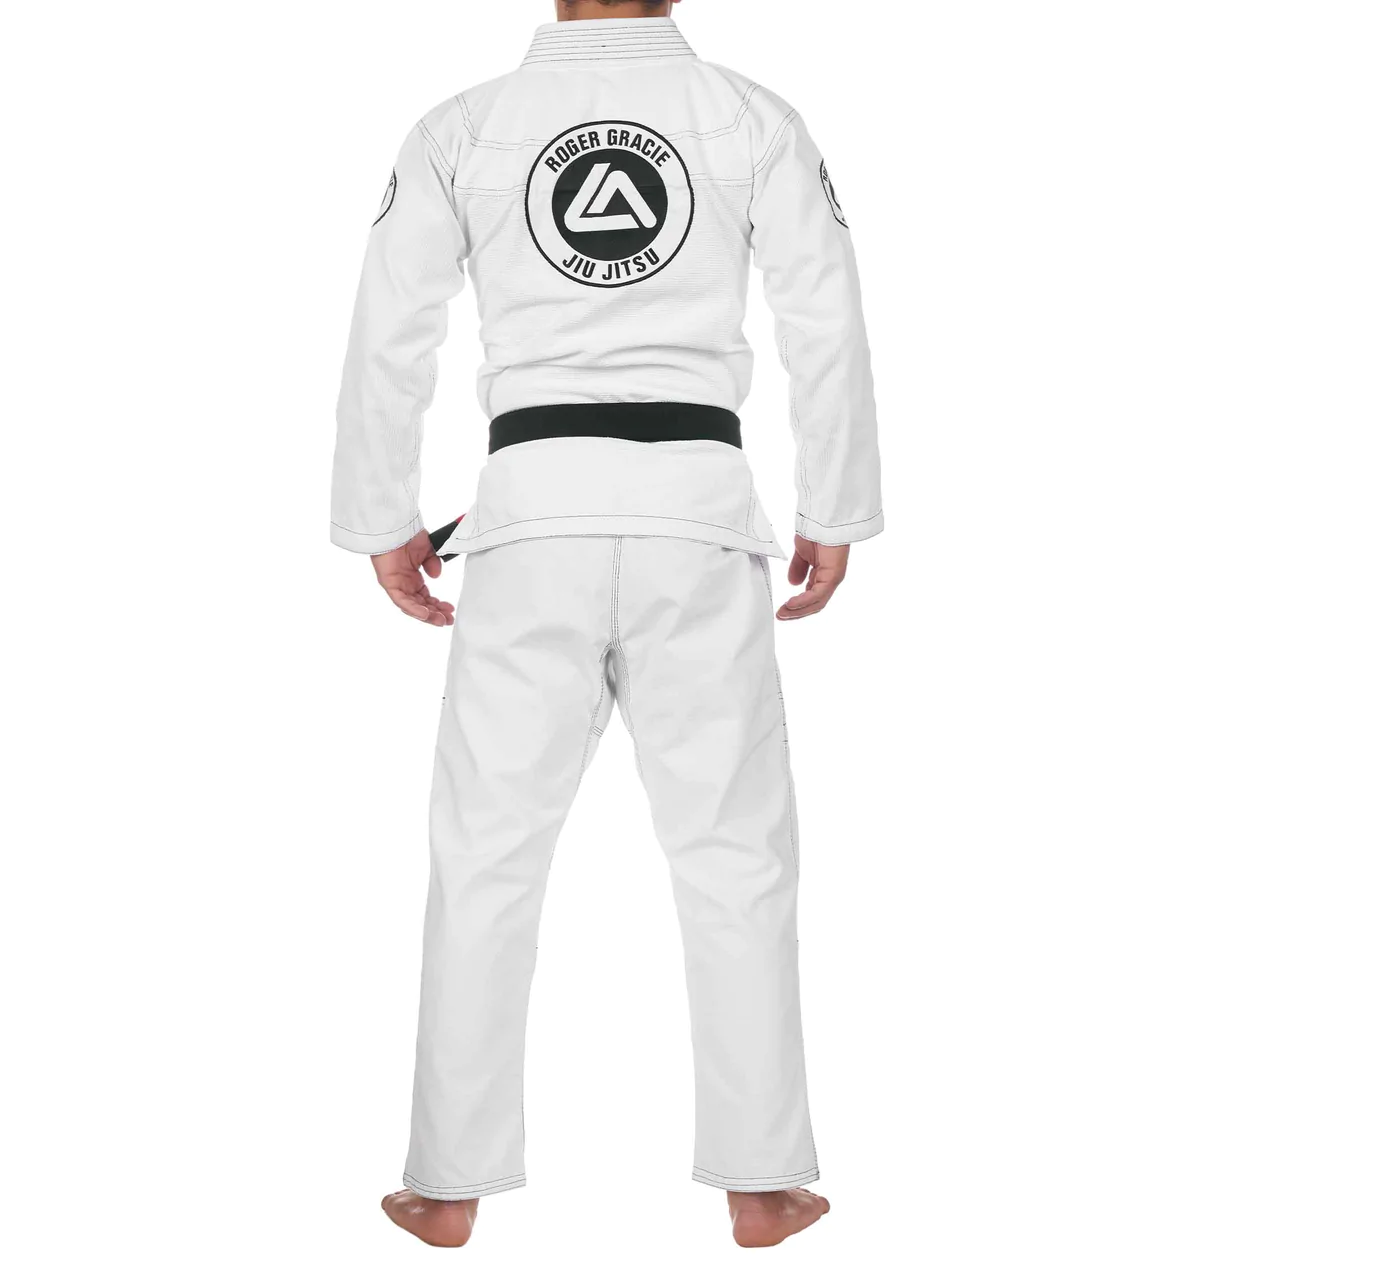 Rear view of a Roger Gracie competition cut Gi